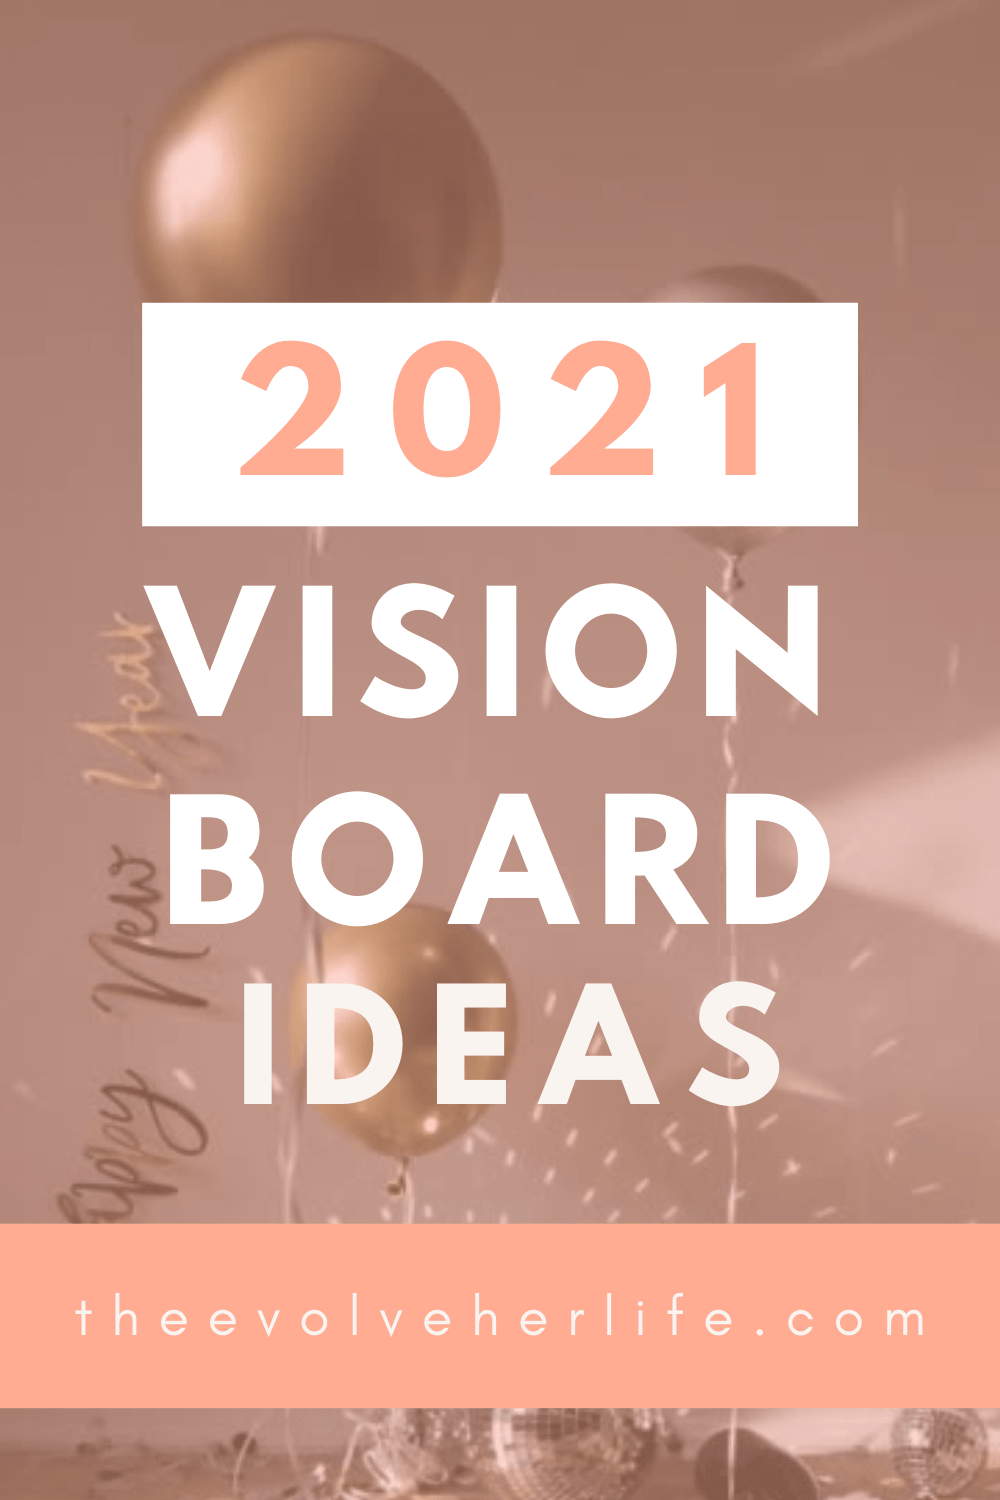 7 Inspirational Vision Board Ideas That Actually Work In 2021